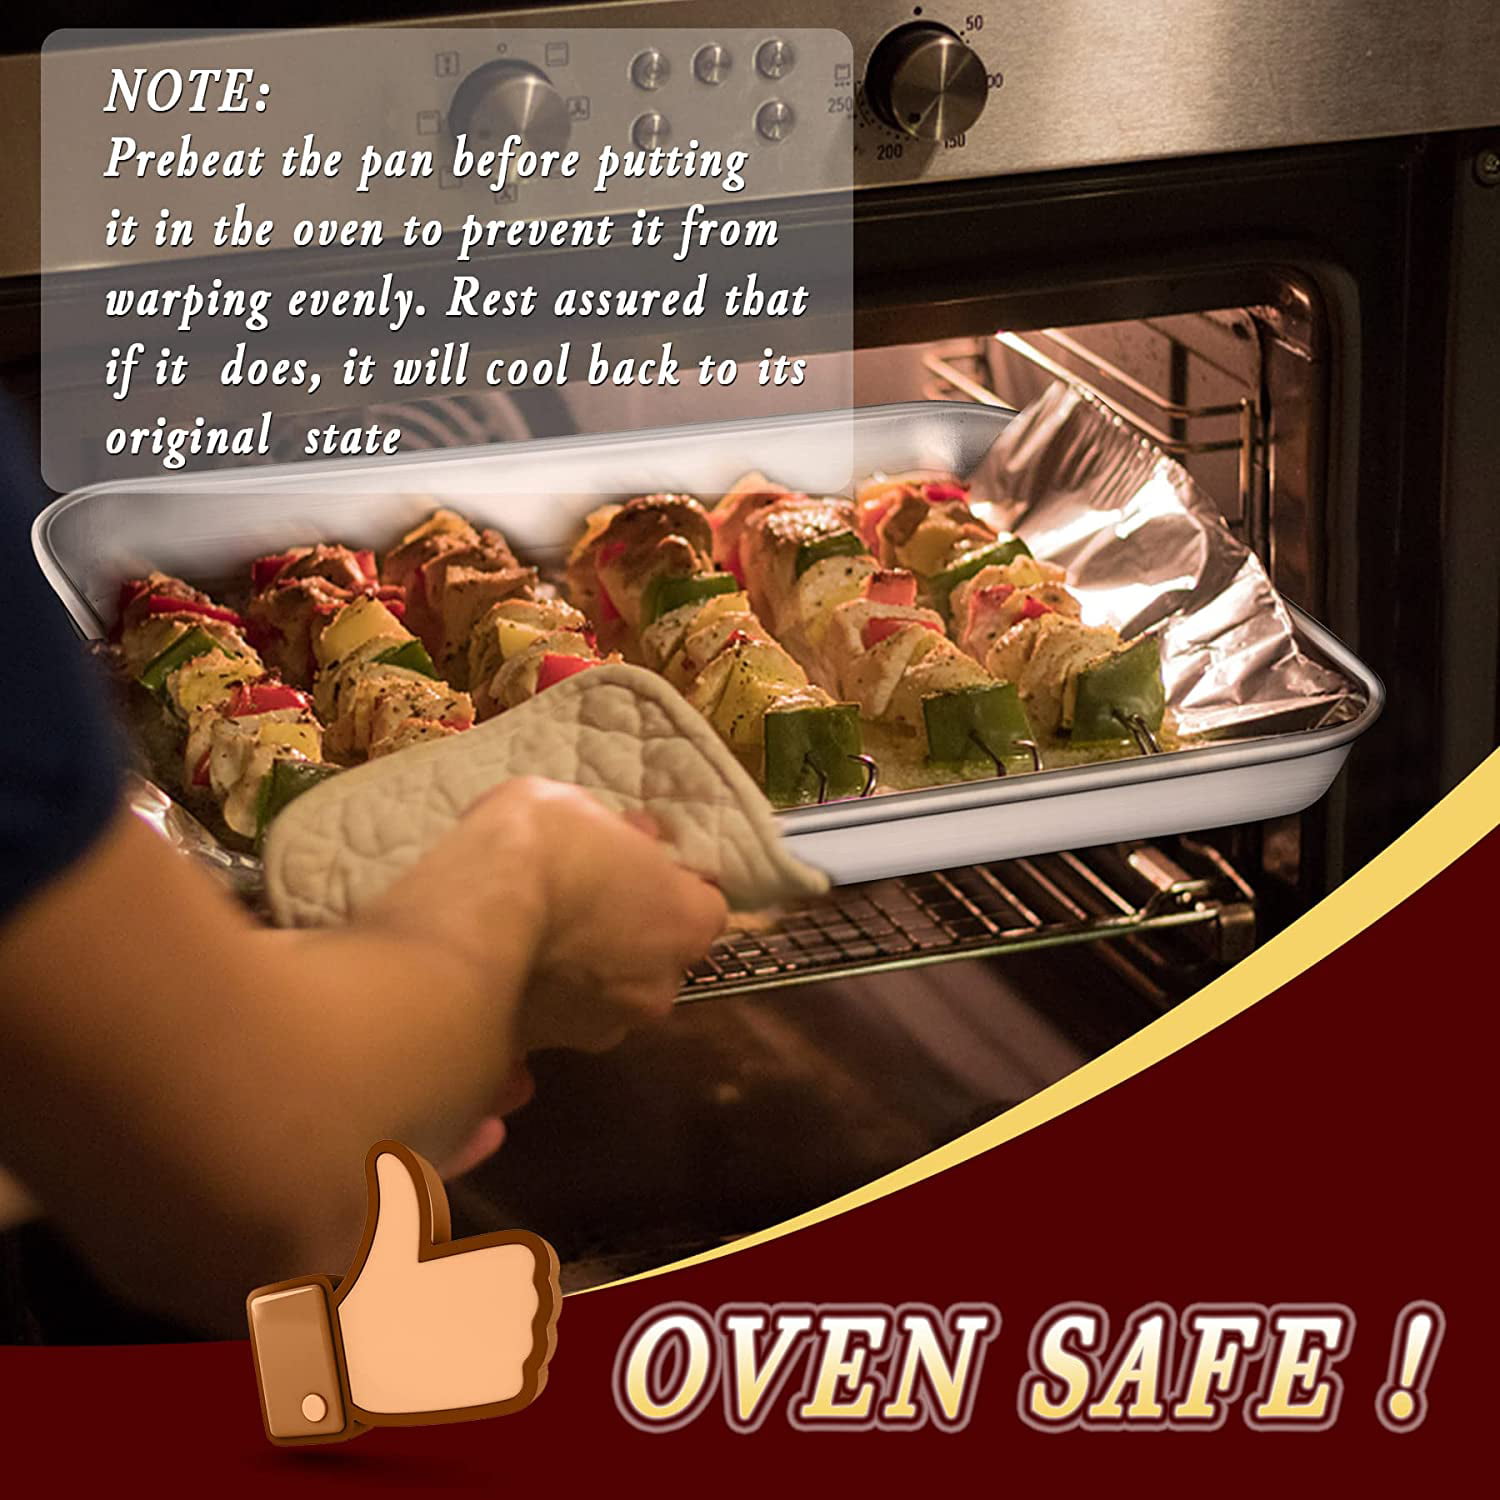 Help Prevent Rust on Baking Sheets and Other Bake/Cookware With